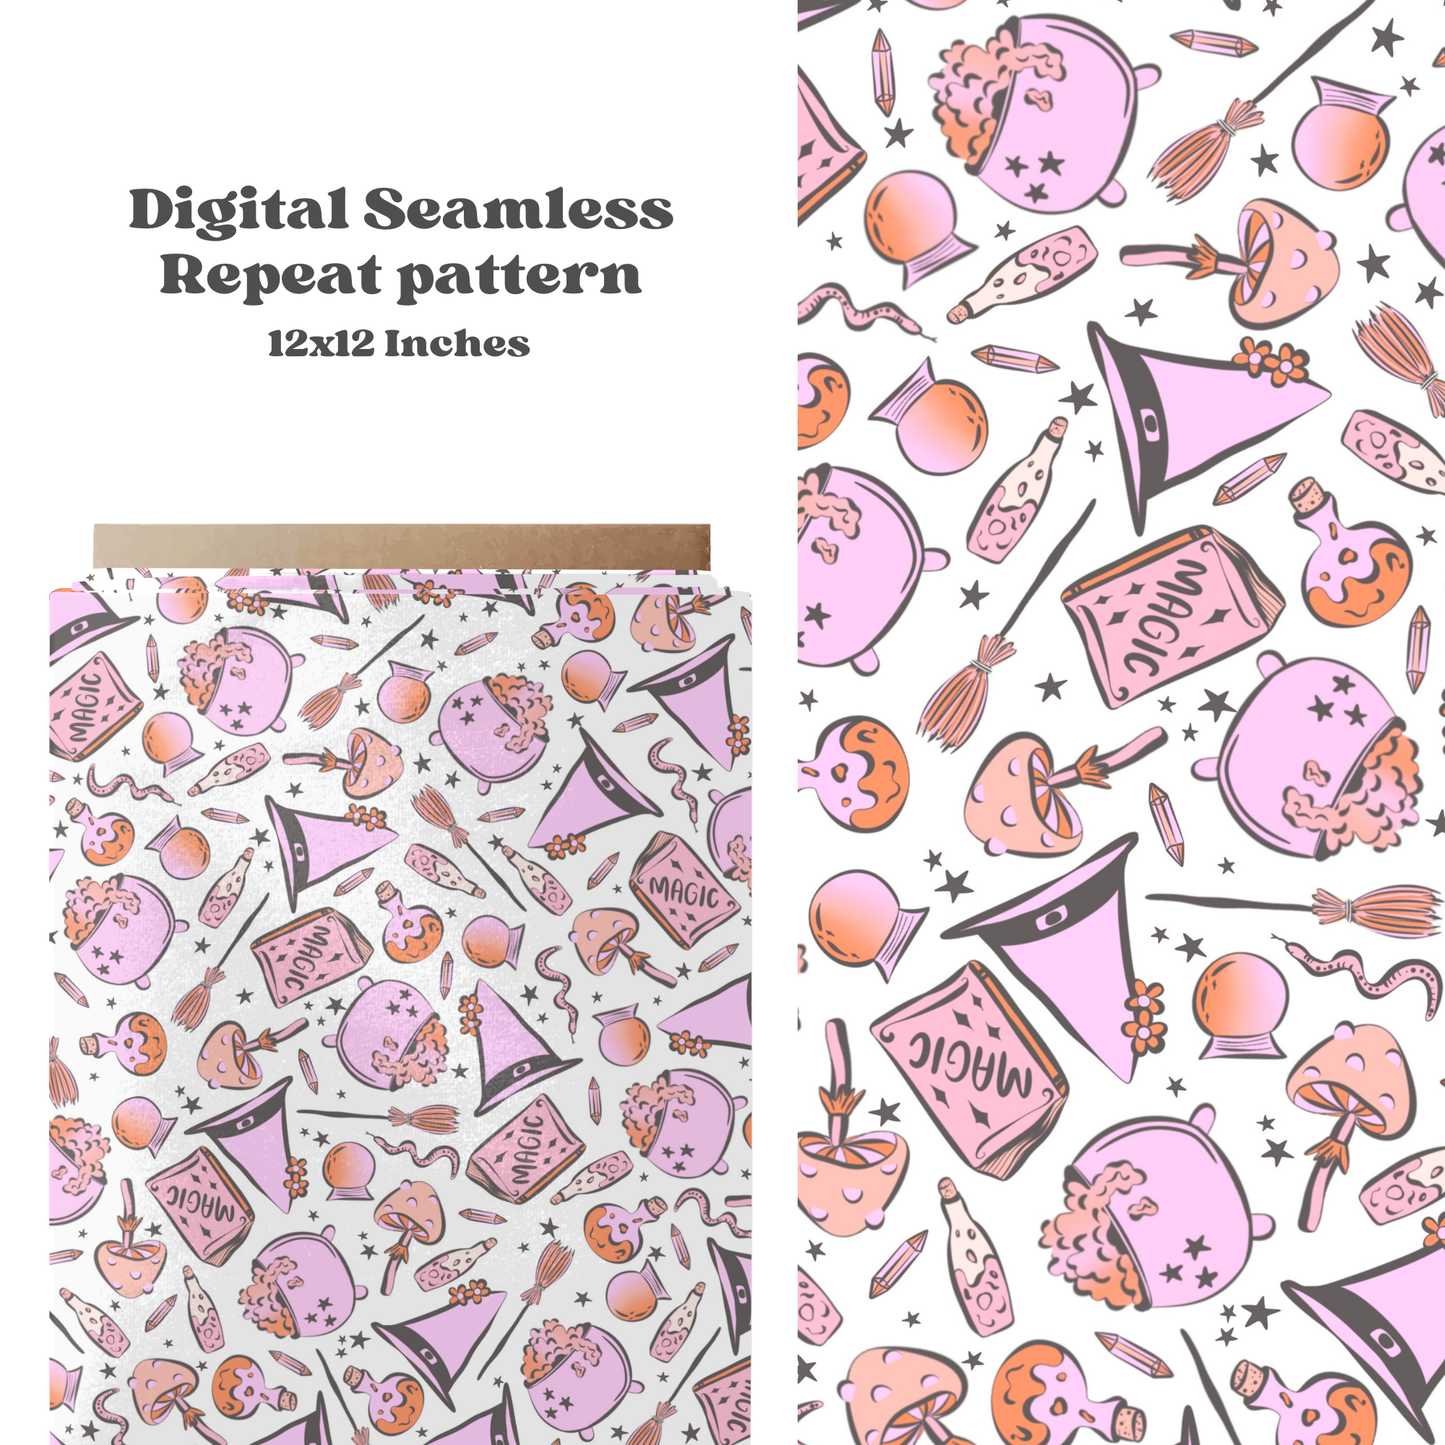 Boho spooky witch Halloween seamless surface pattern